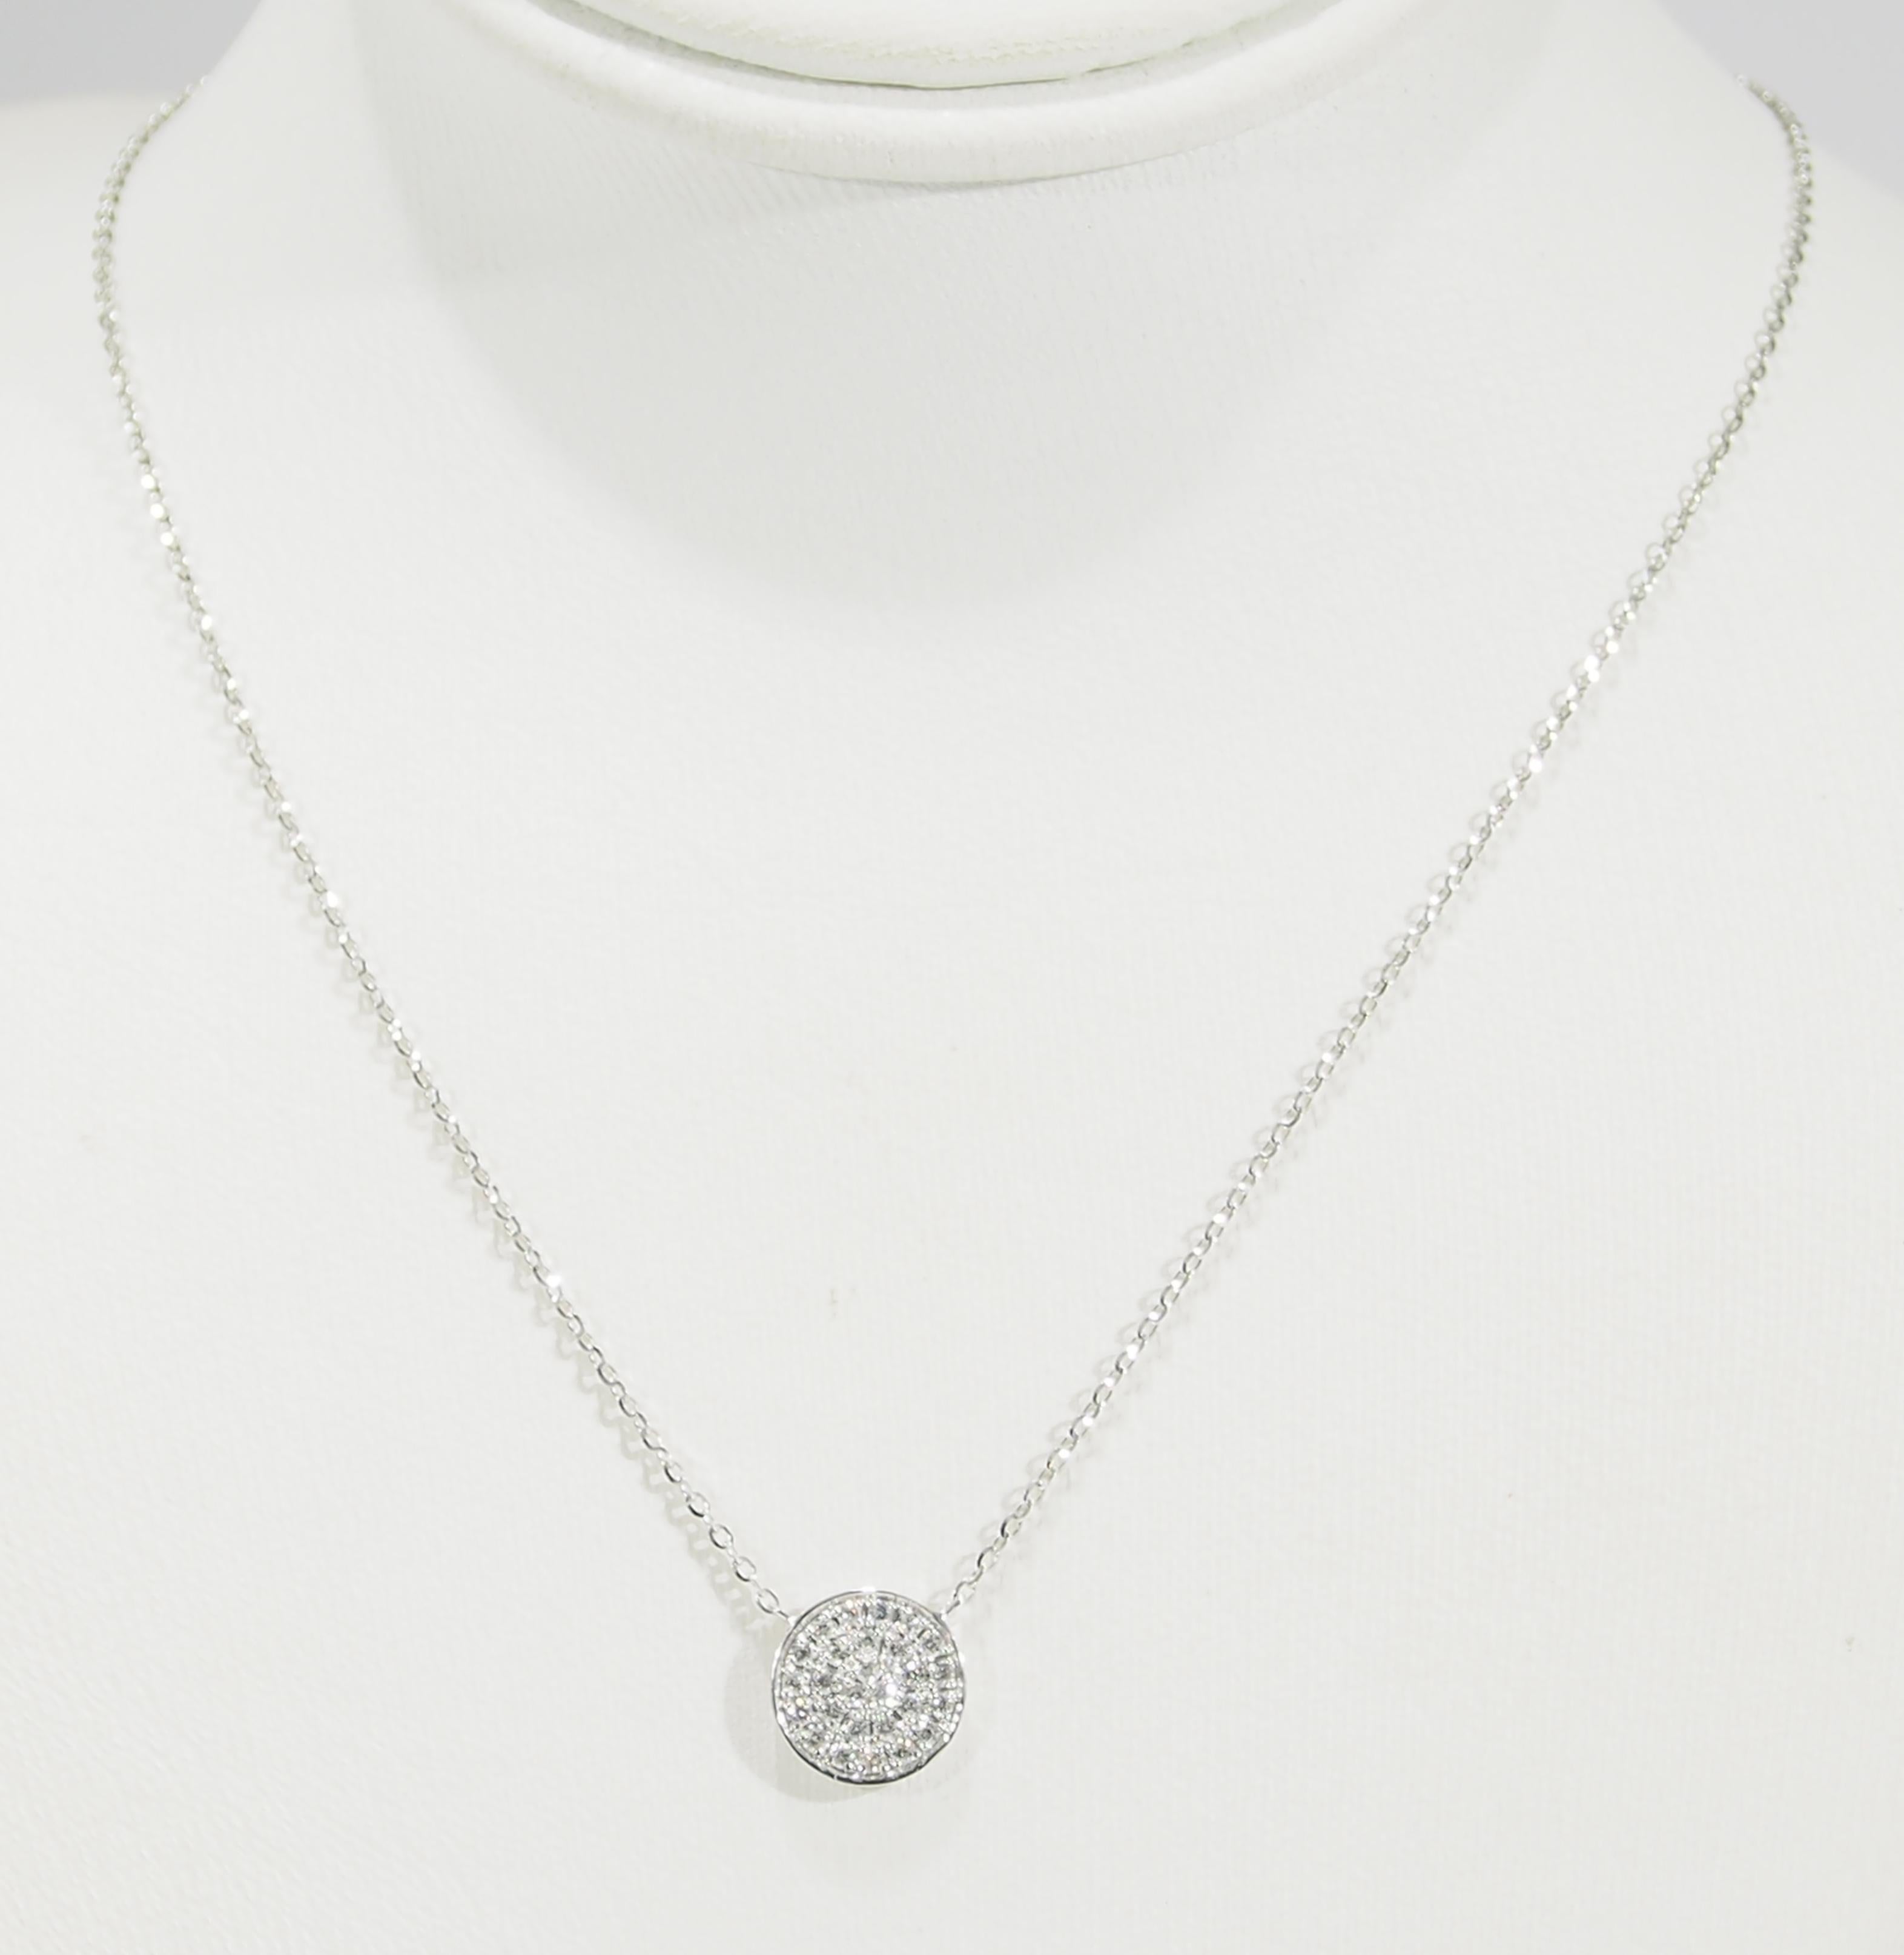 This is a delightful 18K White Gold Necklace highlighted by a sparkling Diamond Disc. There are (27) Round Brilliant Cut Diamonds, approximately 0.18ctw, G-H in Color, VS-SI in Clarity set in a 3/8 inch diameter Disc. A charming Necklace to be worn